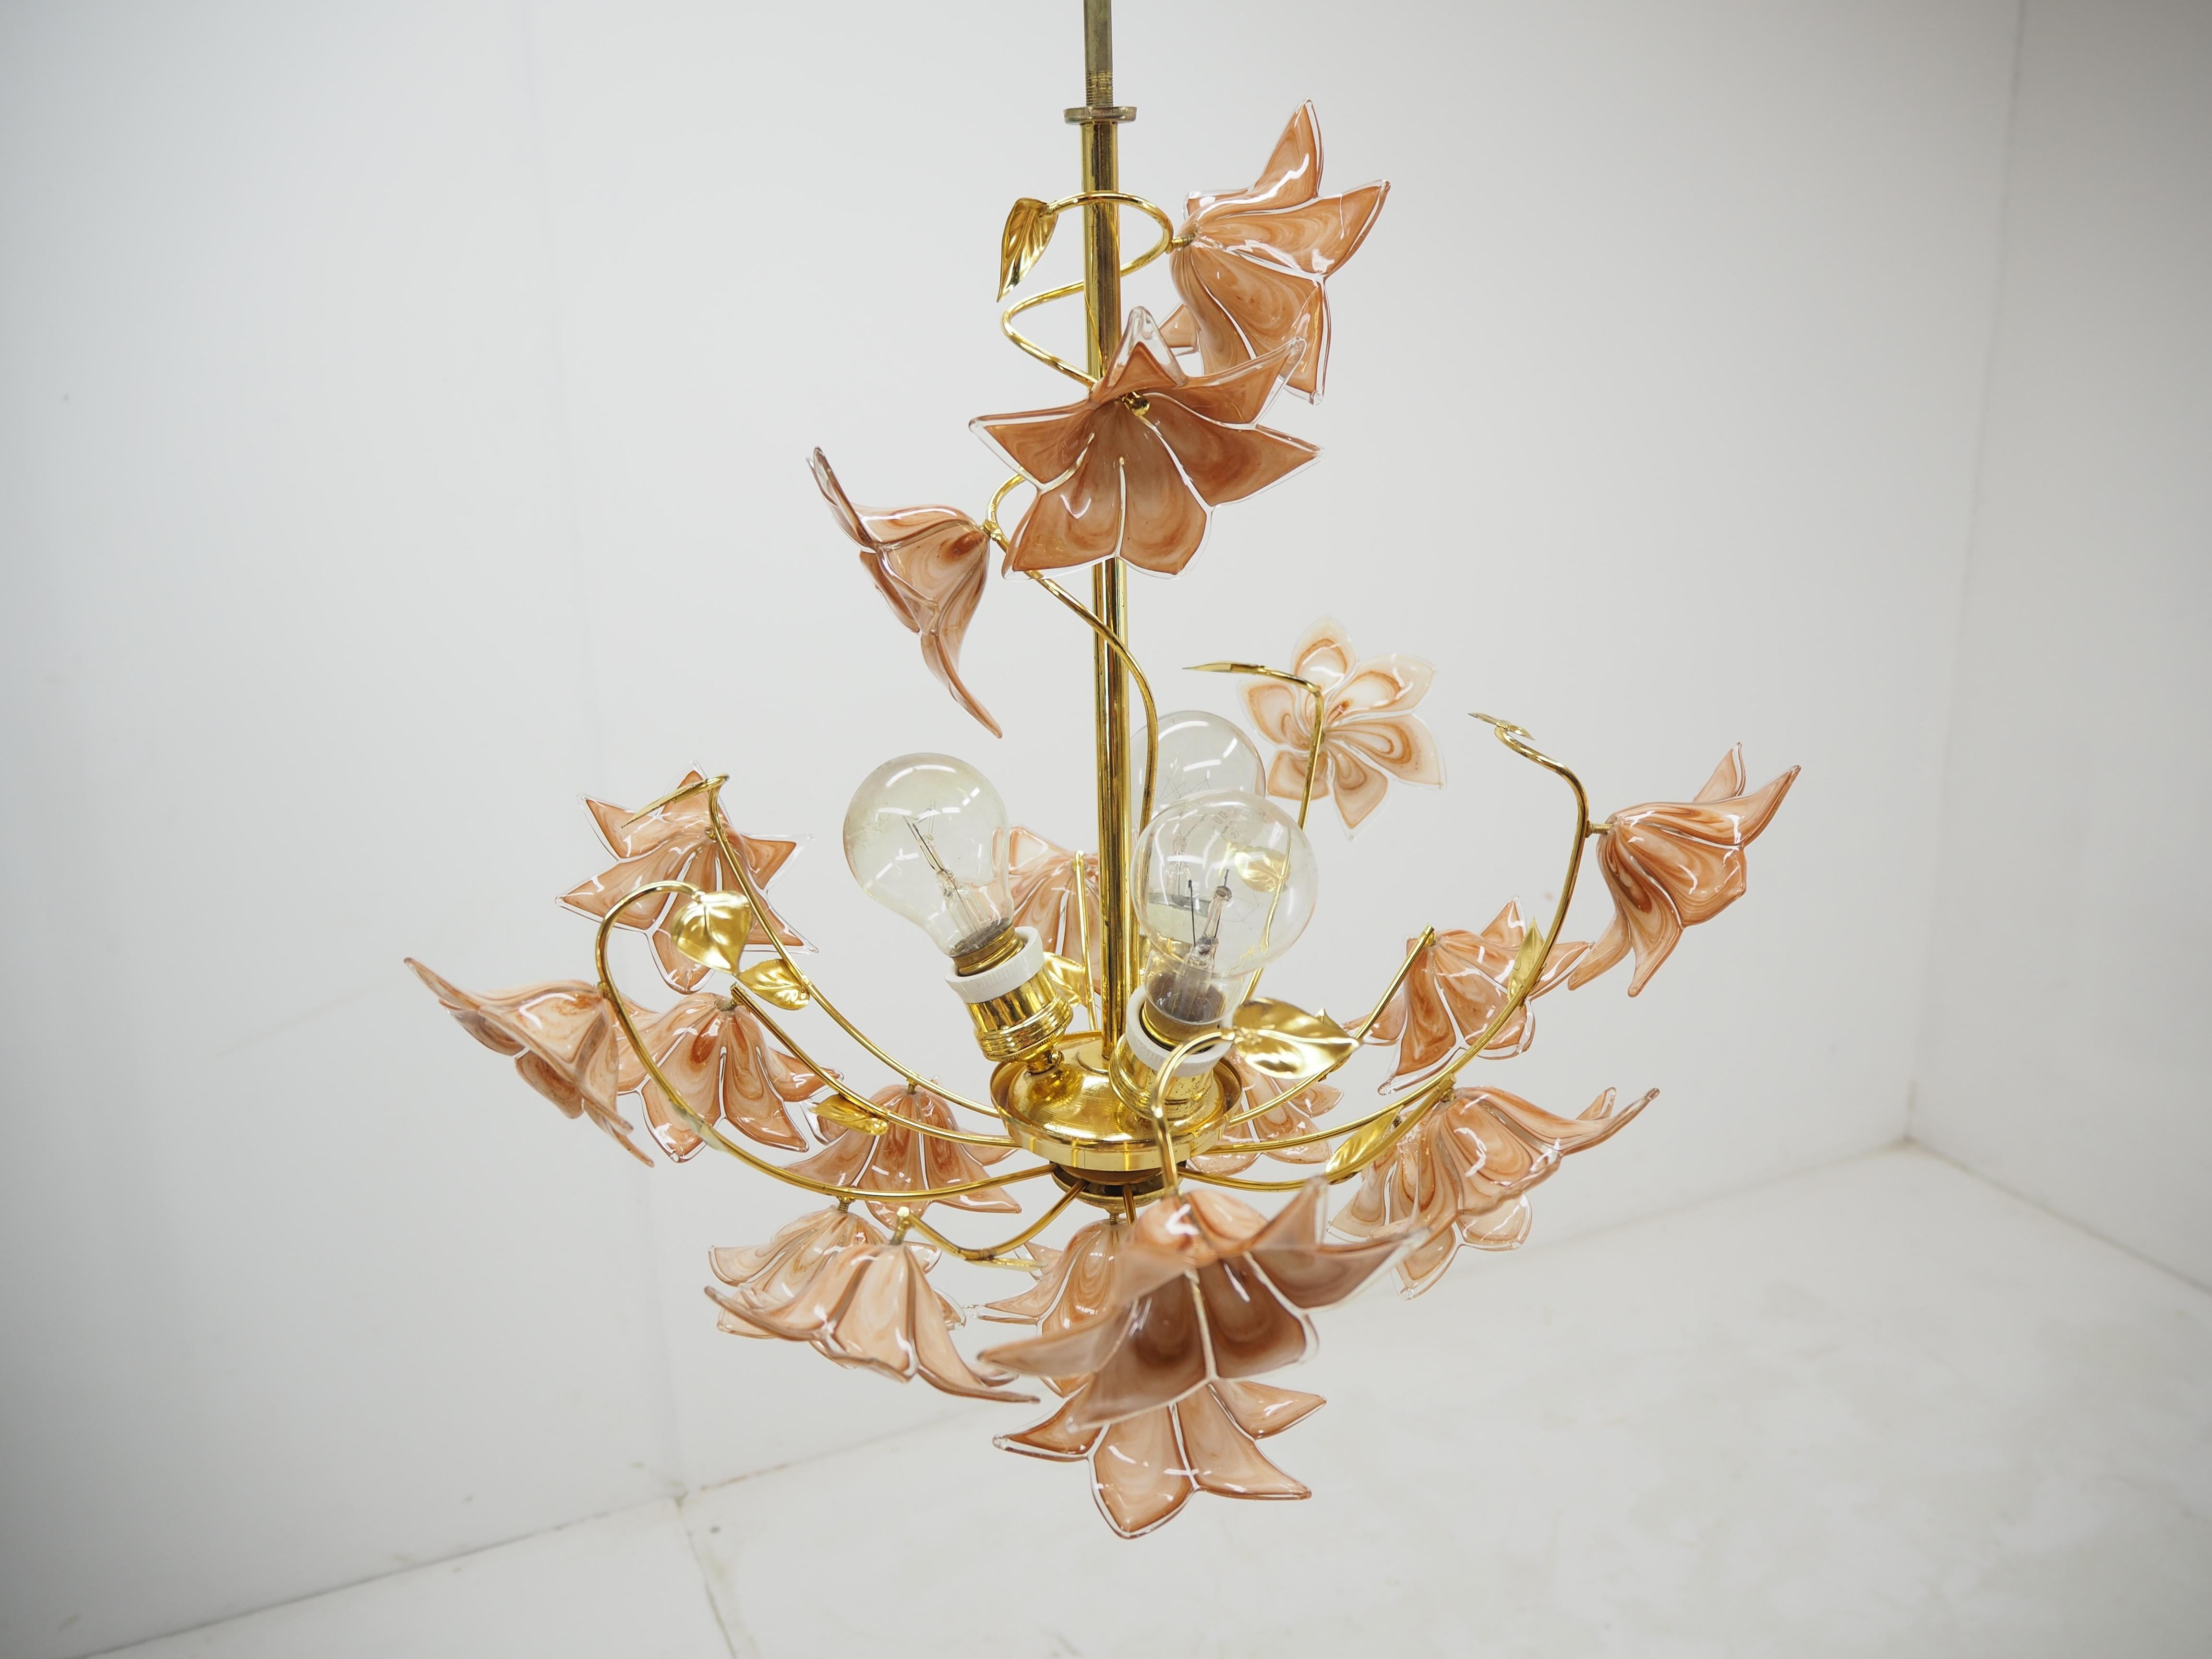 European Midcentury Flowers Chandelier, Glass and Brass, 1960s For Sale